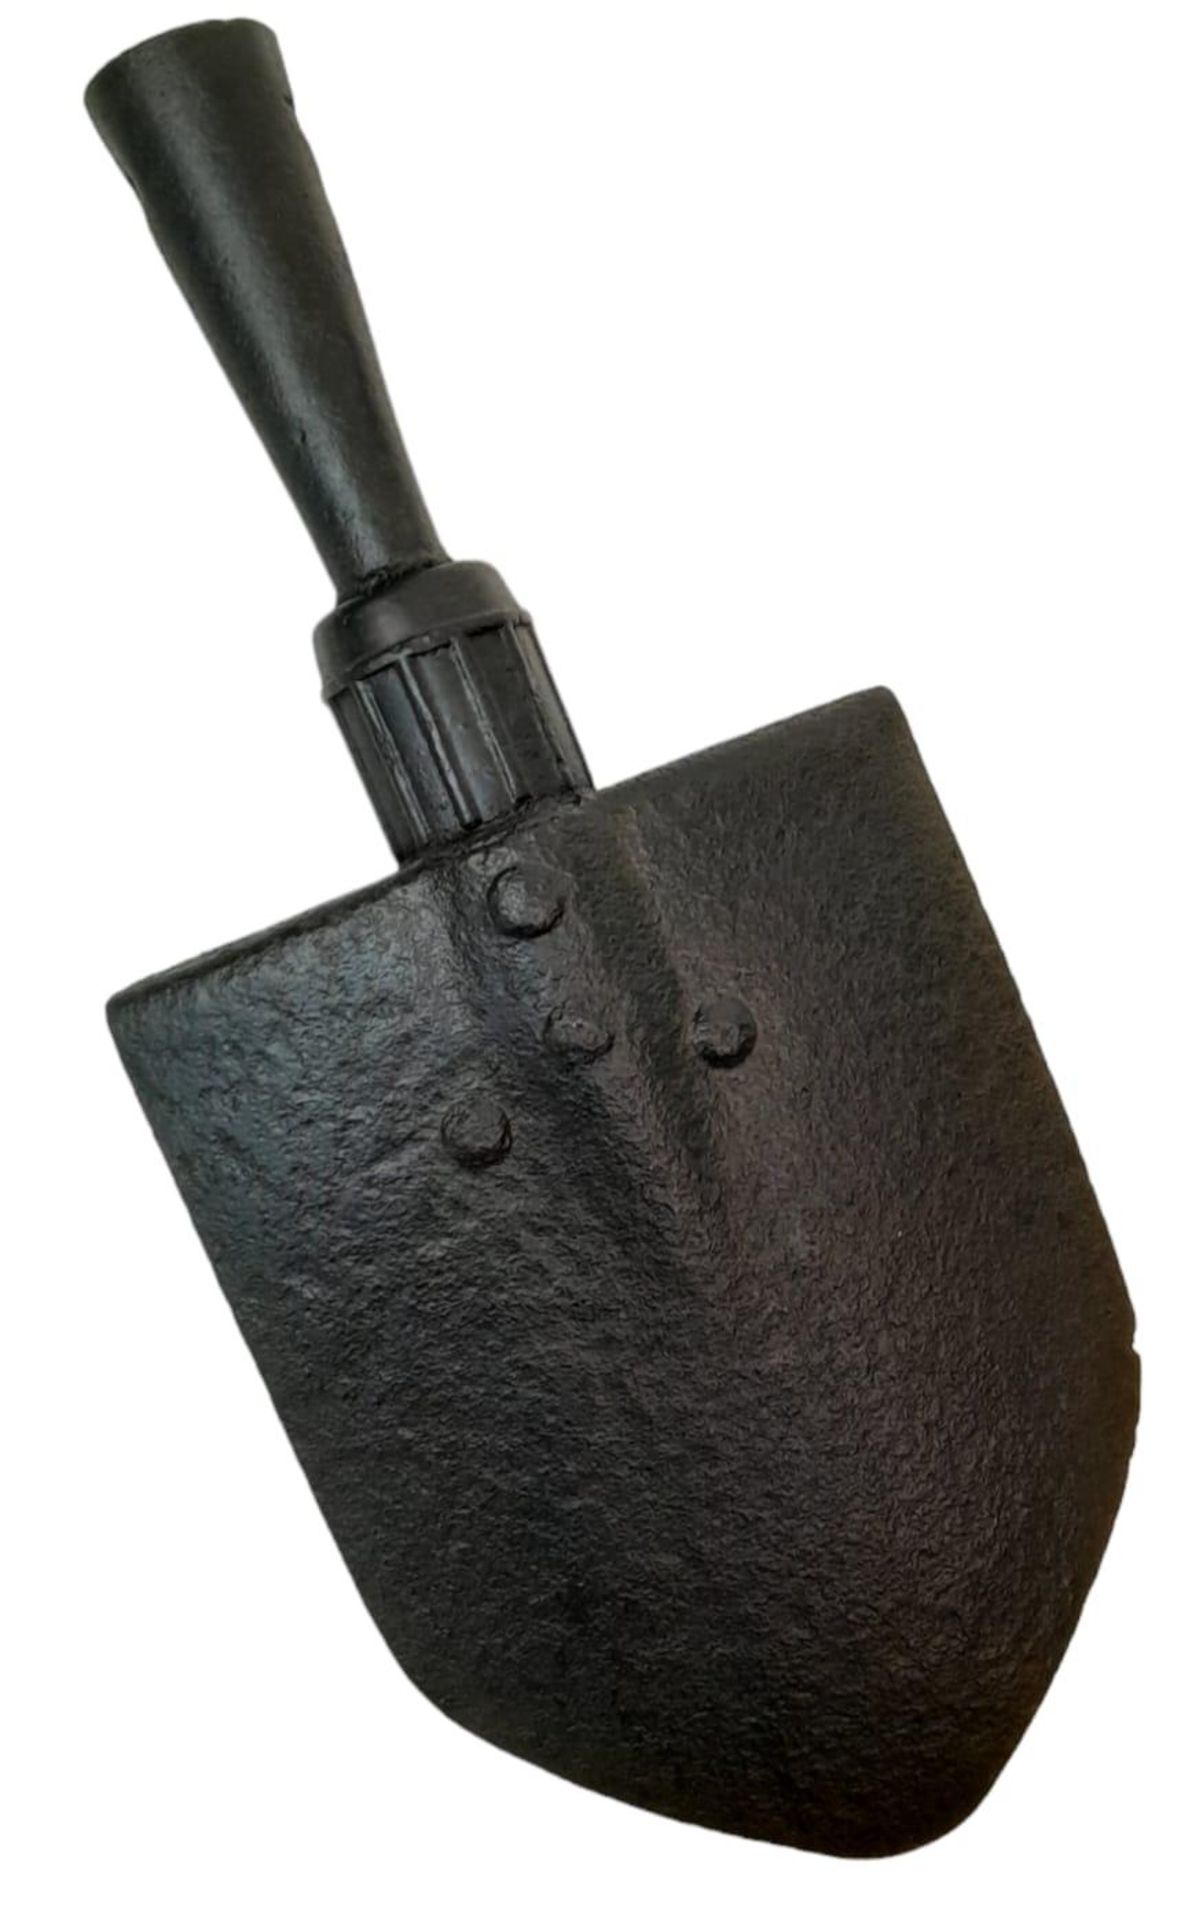 WW2 Normandy Relic US Entrenching Tool, Found Carentan, Normandy France with a post War Memorial - Image 4 of 10